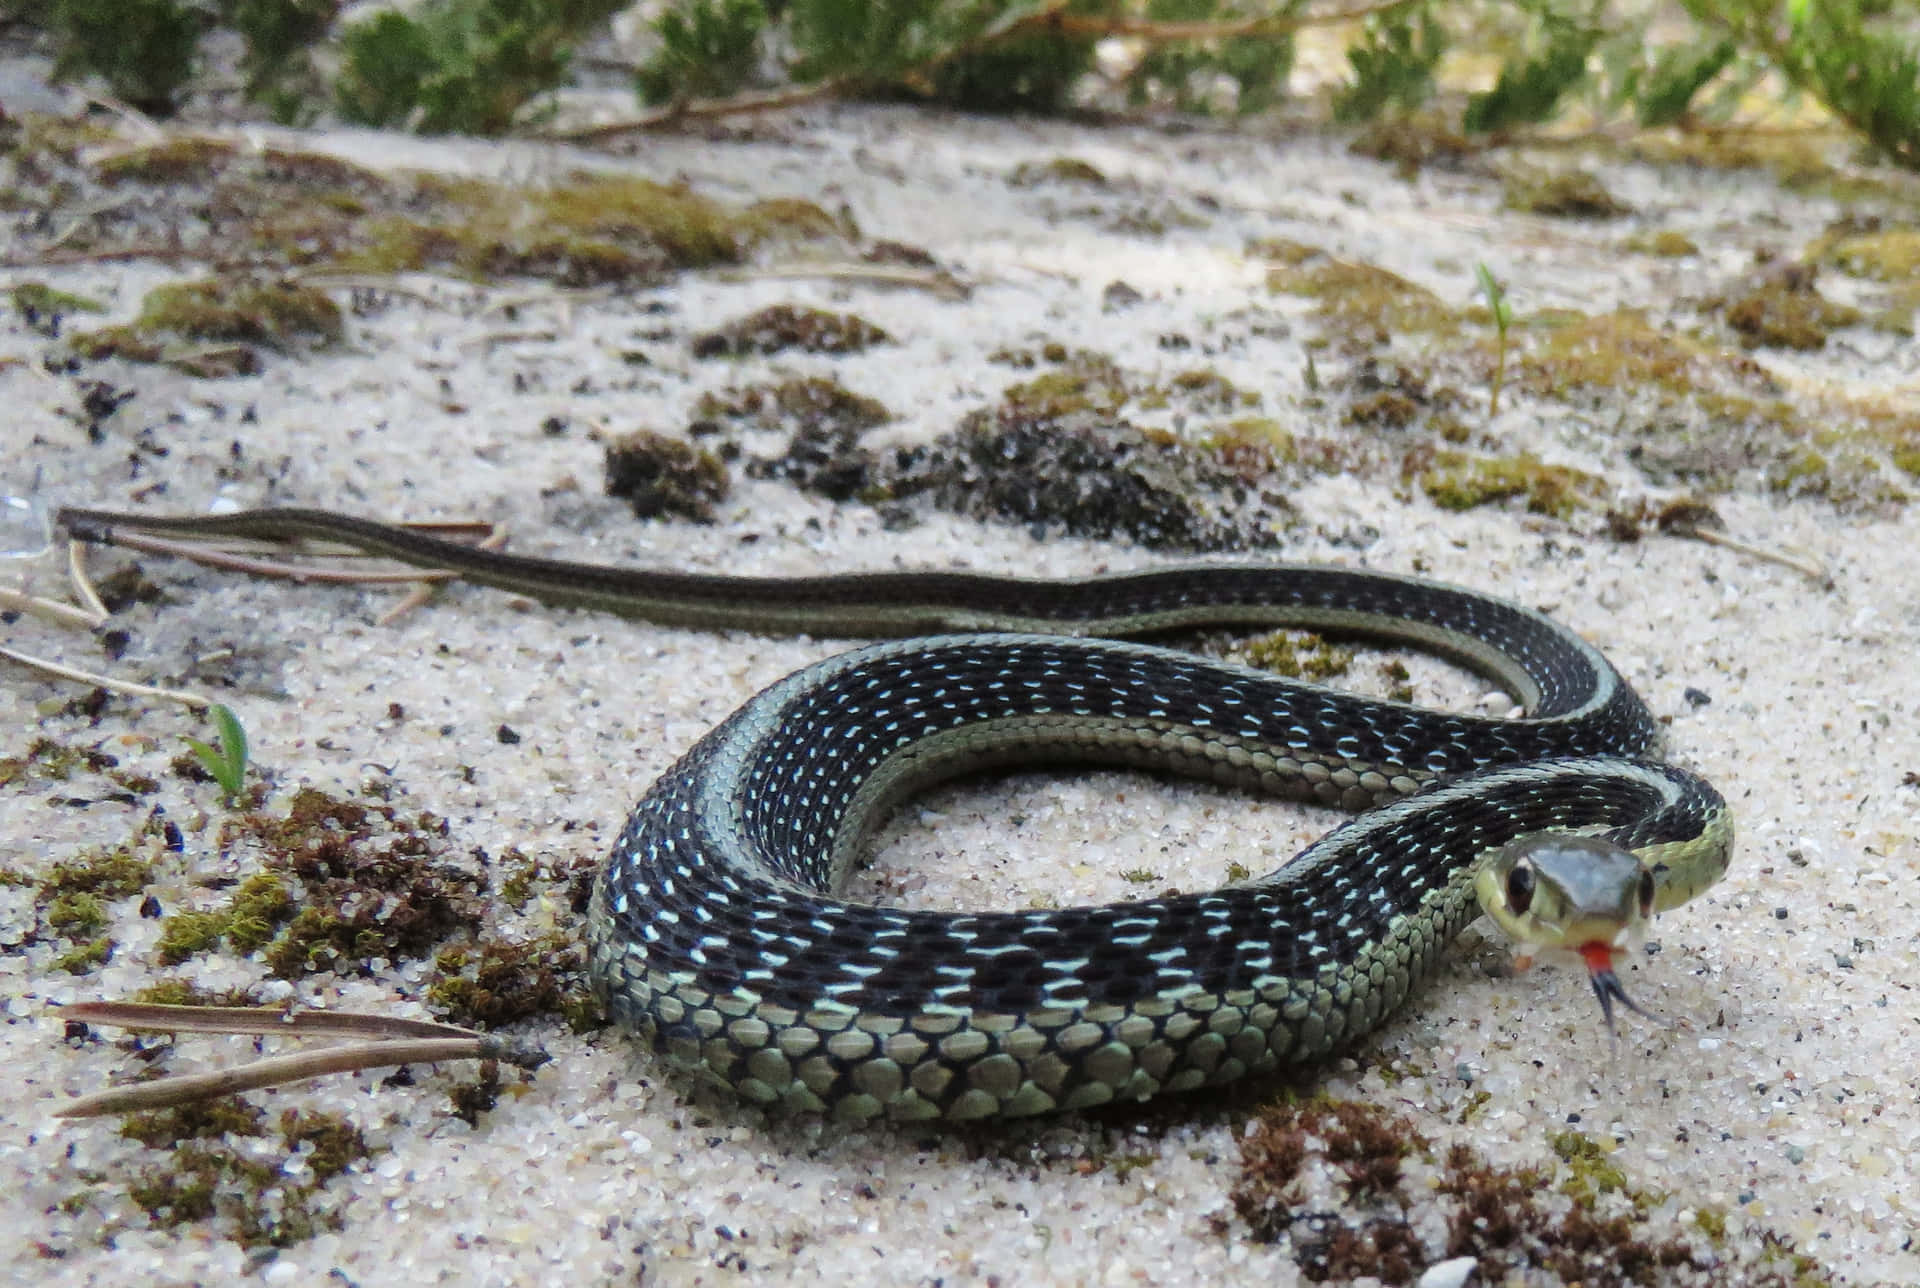 A Snake Is Sitting On The Sand With Grass And Plants